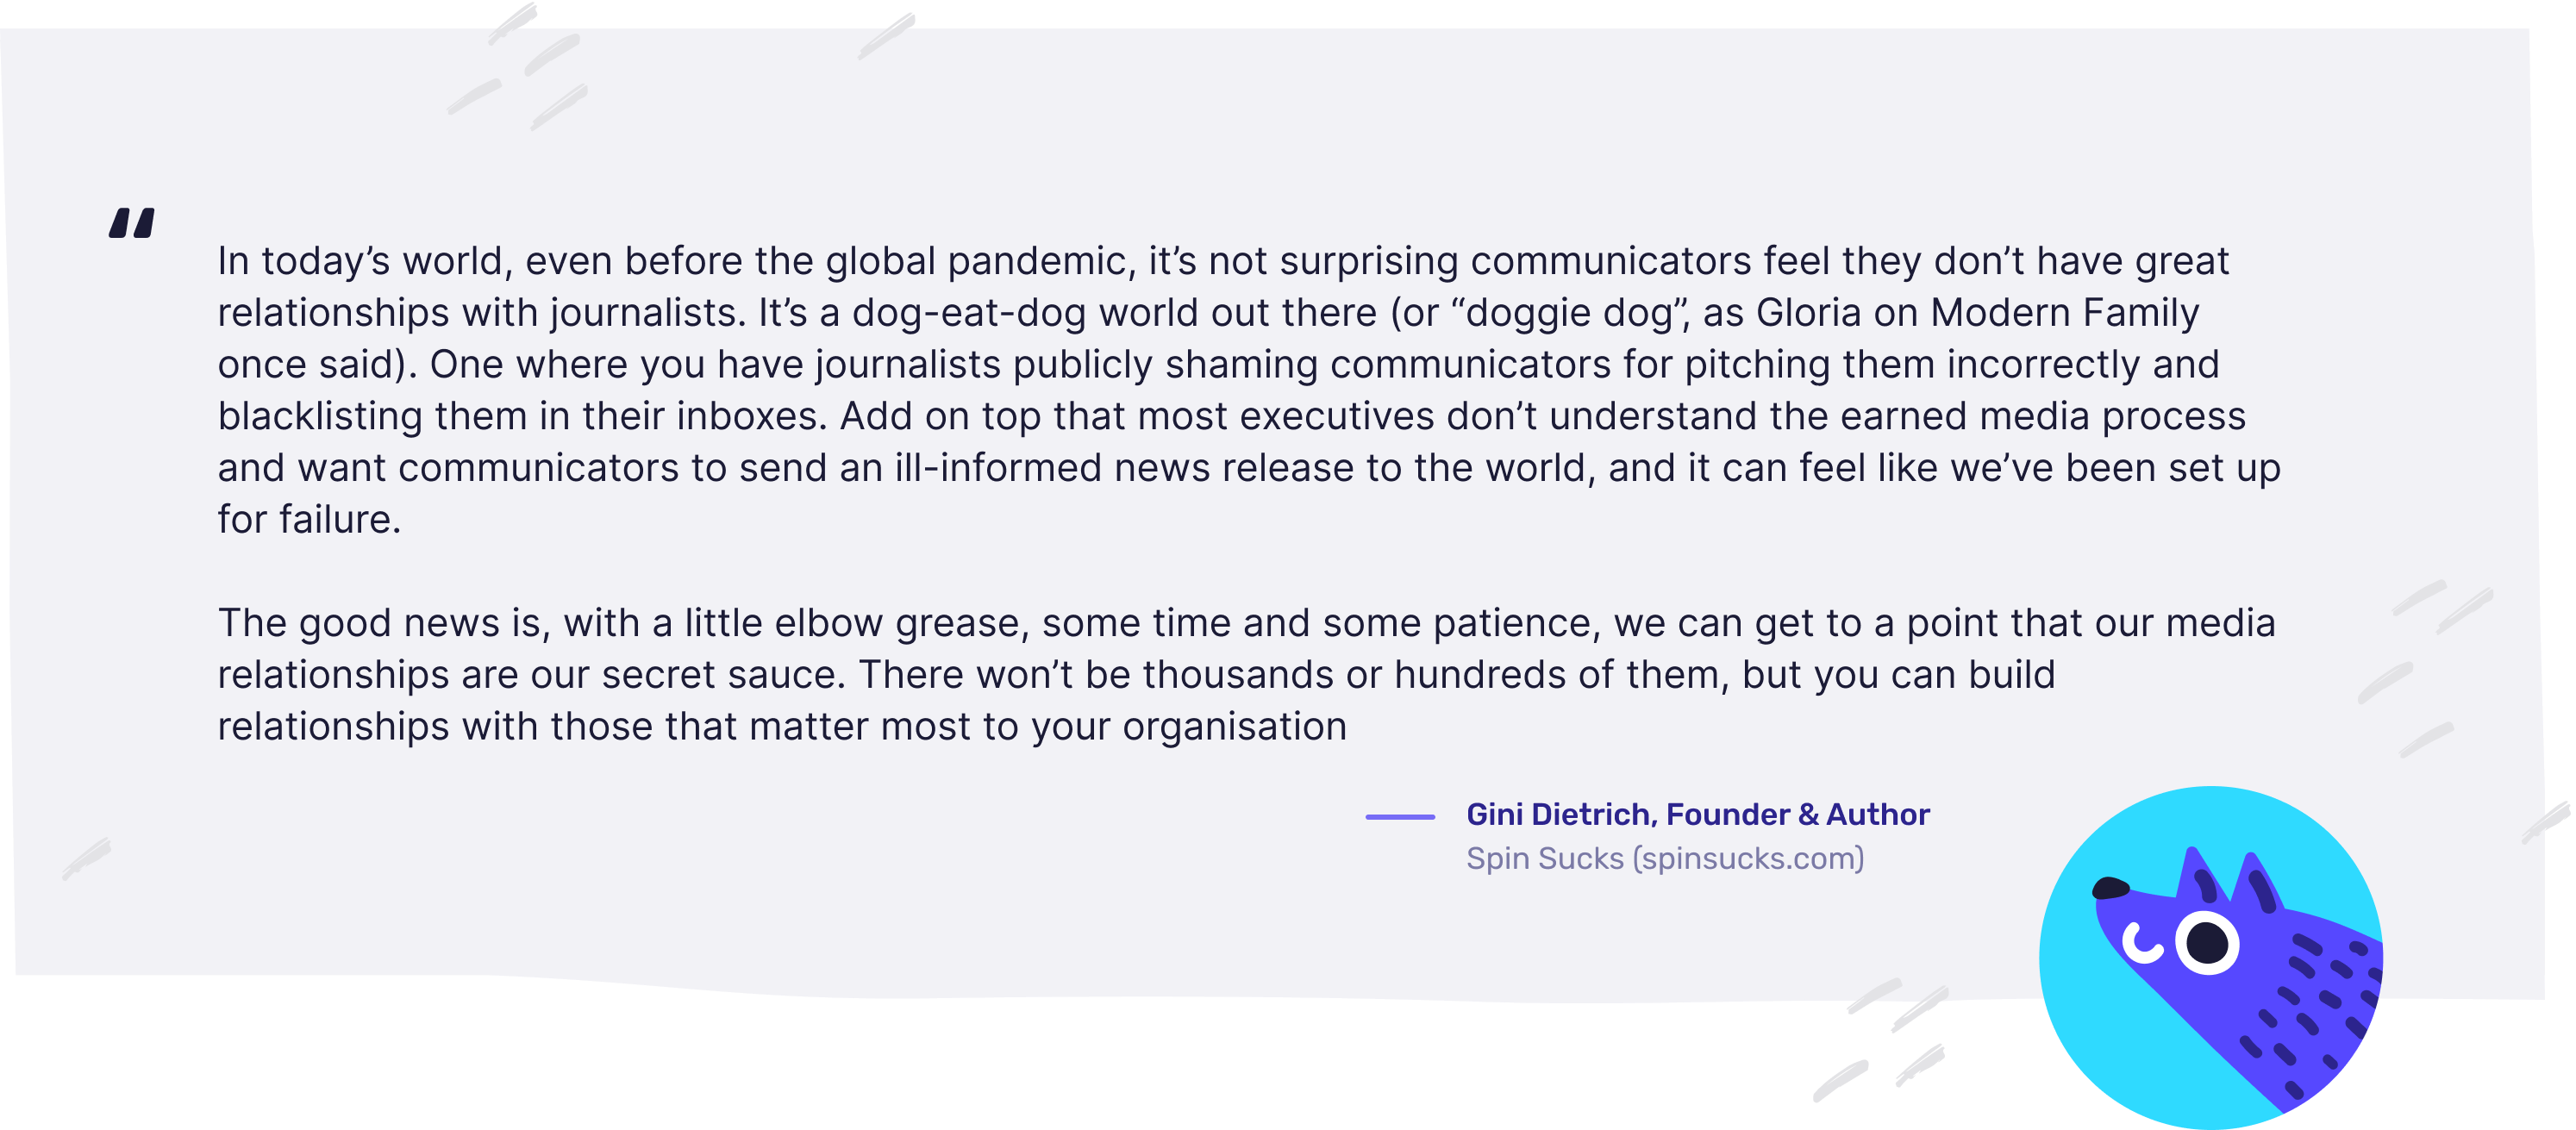 We asked PR guru and real-life sweetheart to comment on our findings and included this quote in our write-up